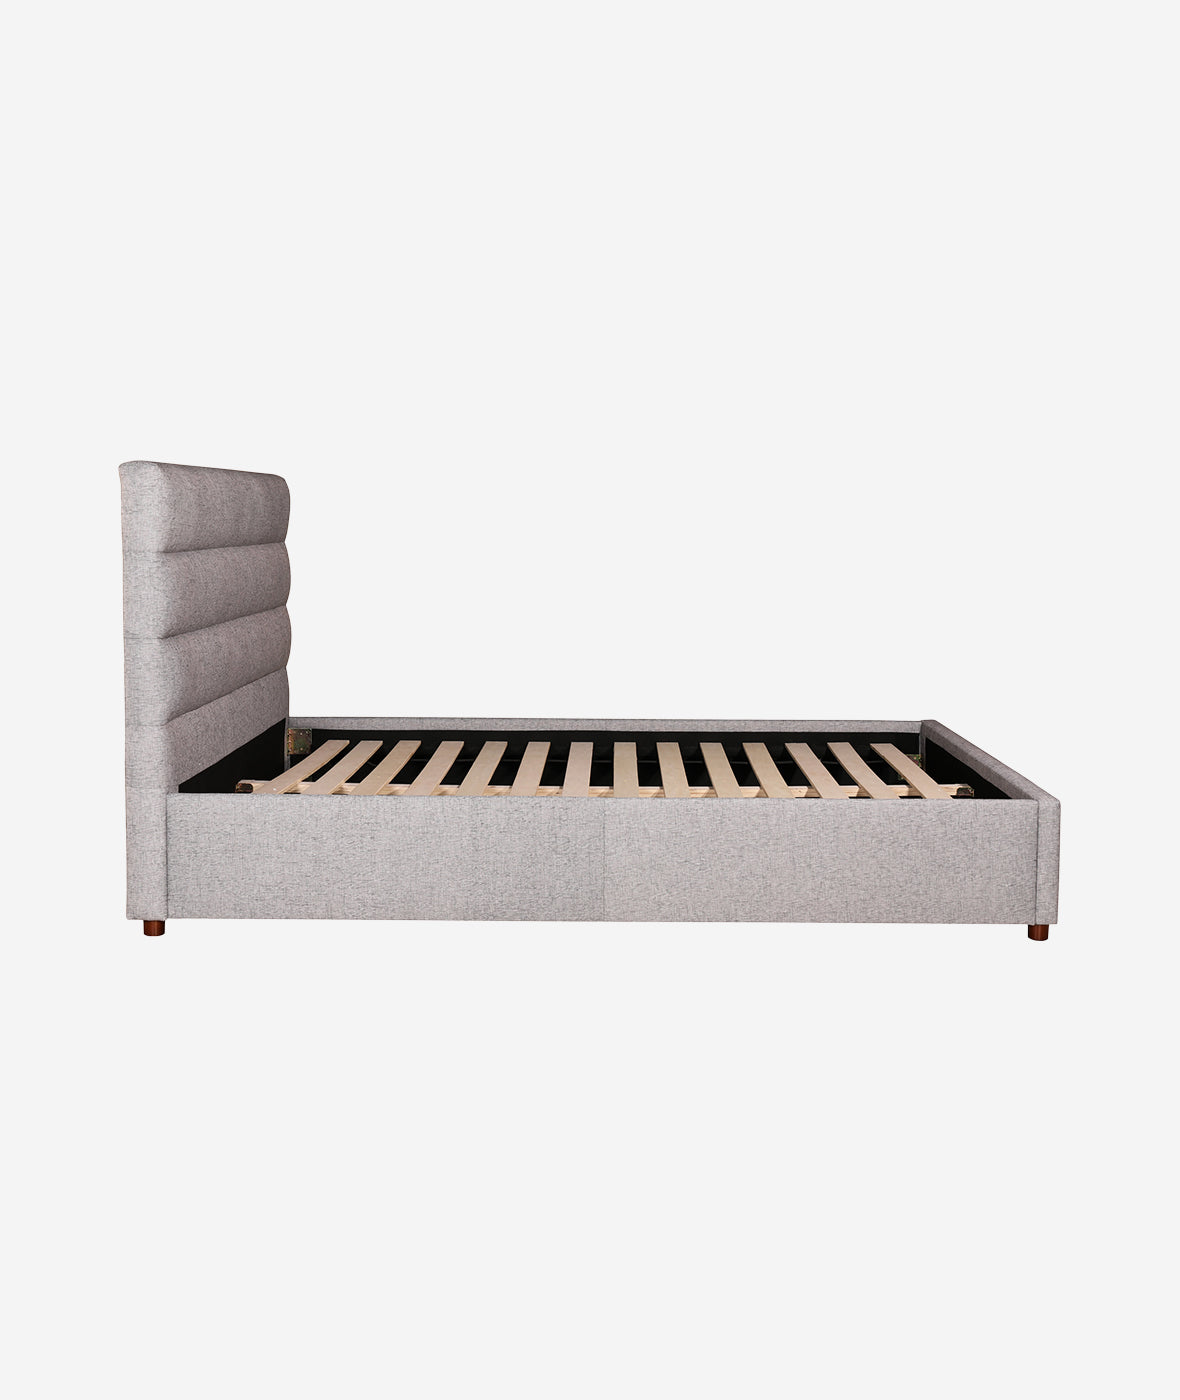 Takio Bed - More Options